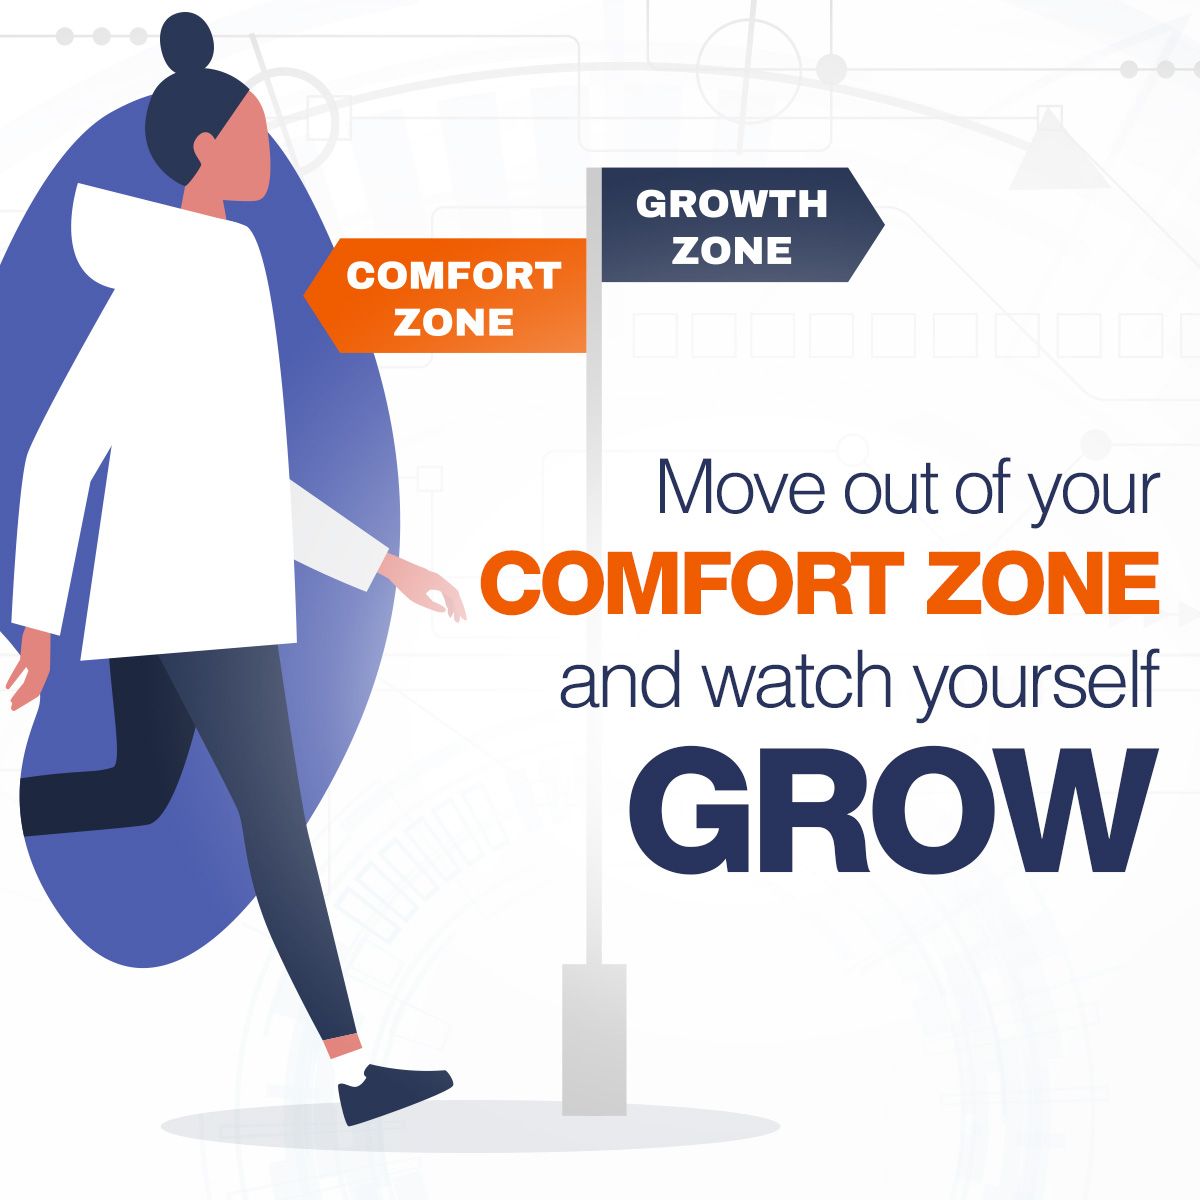 Move out of your comfort zone and watch yourself grow.